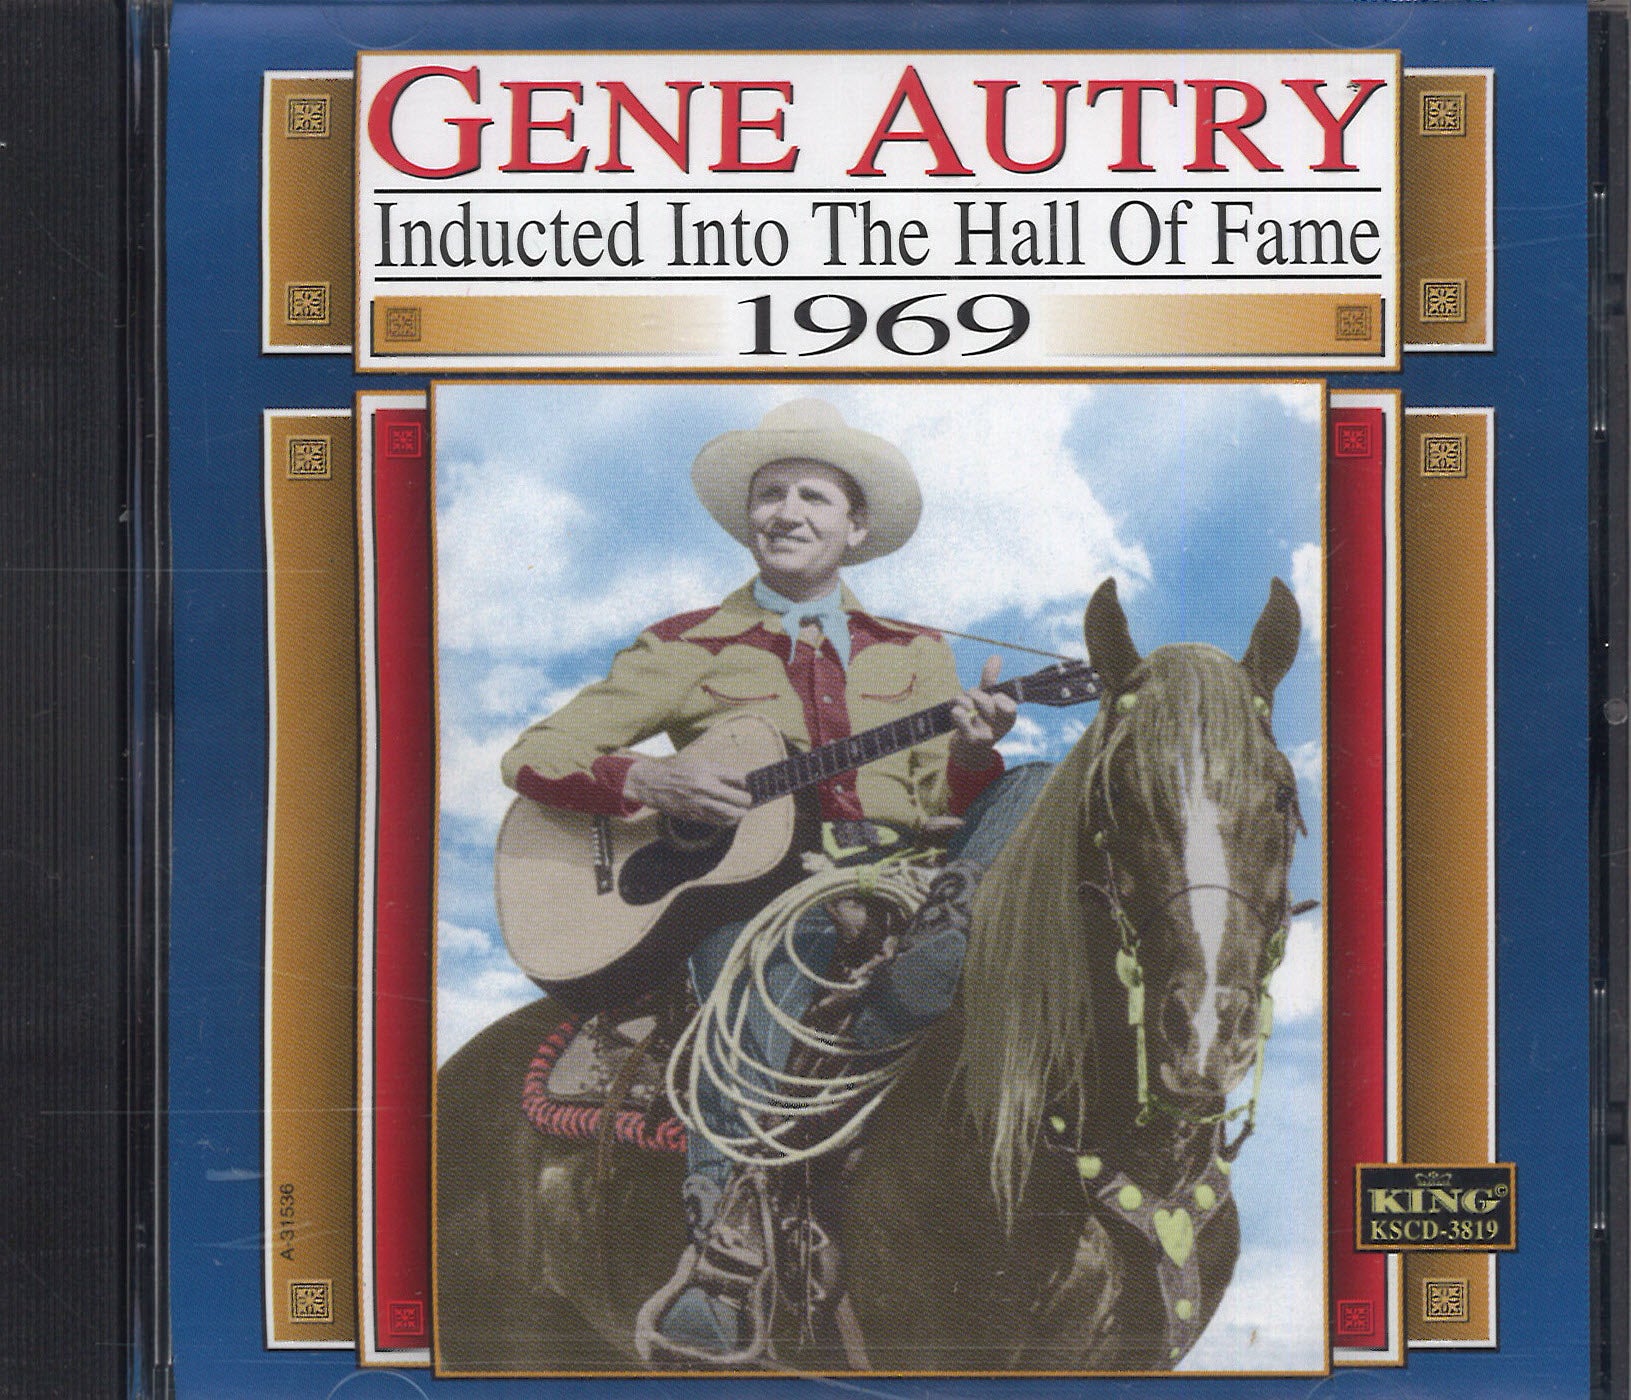 Gene Autry Inducted Into The Hall Of Fame 1969